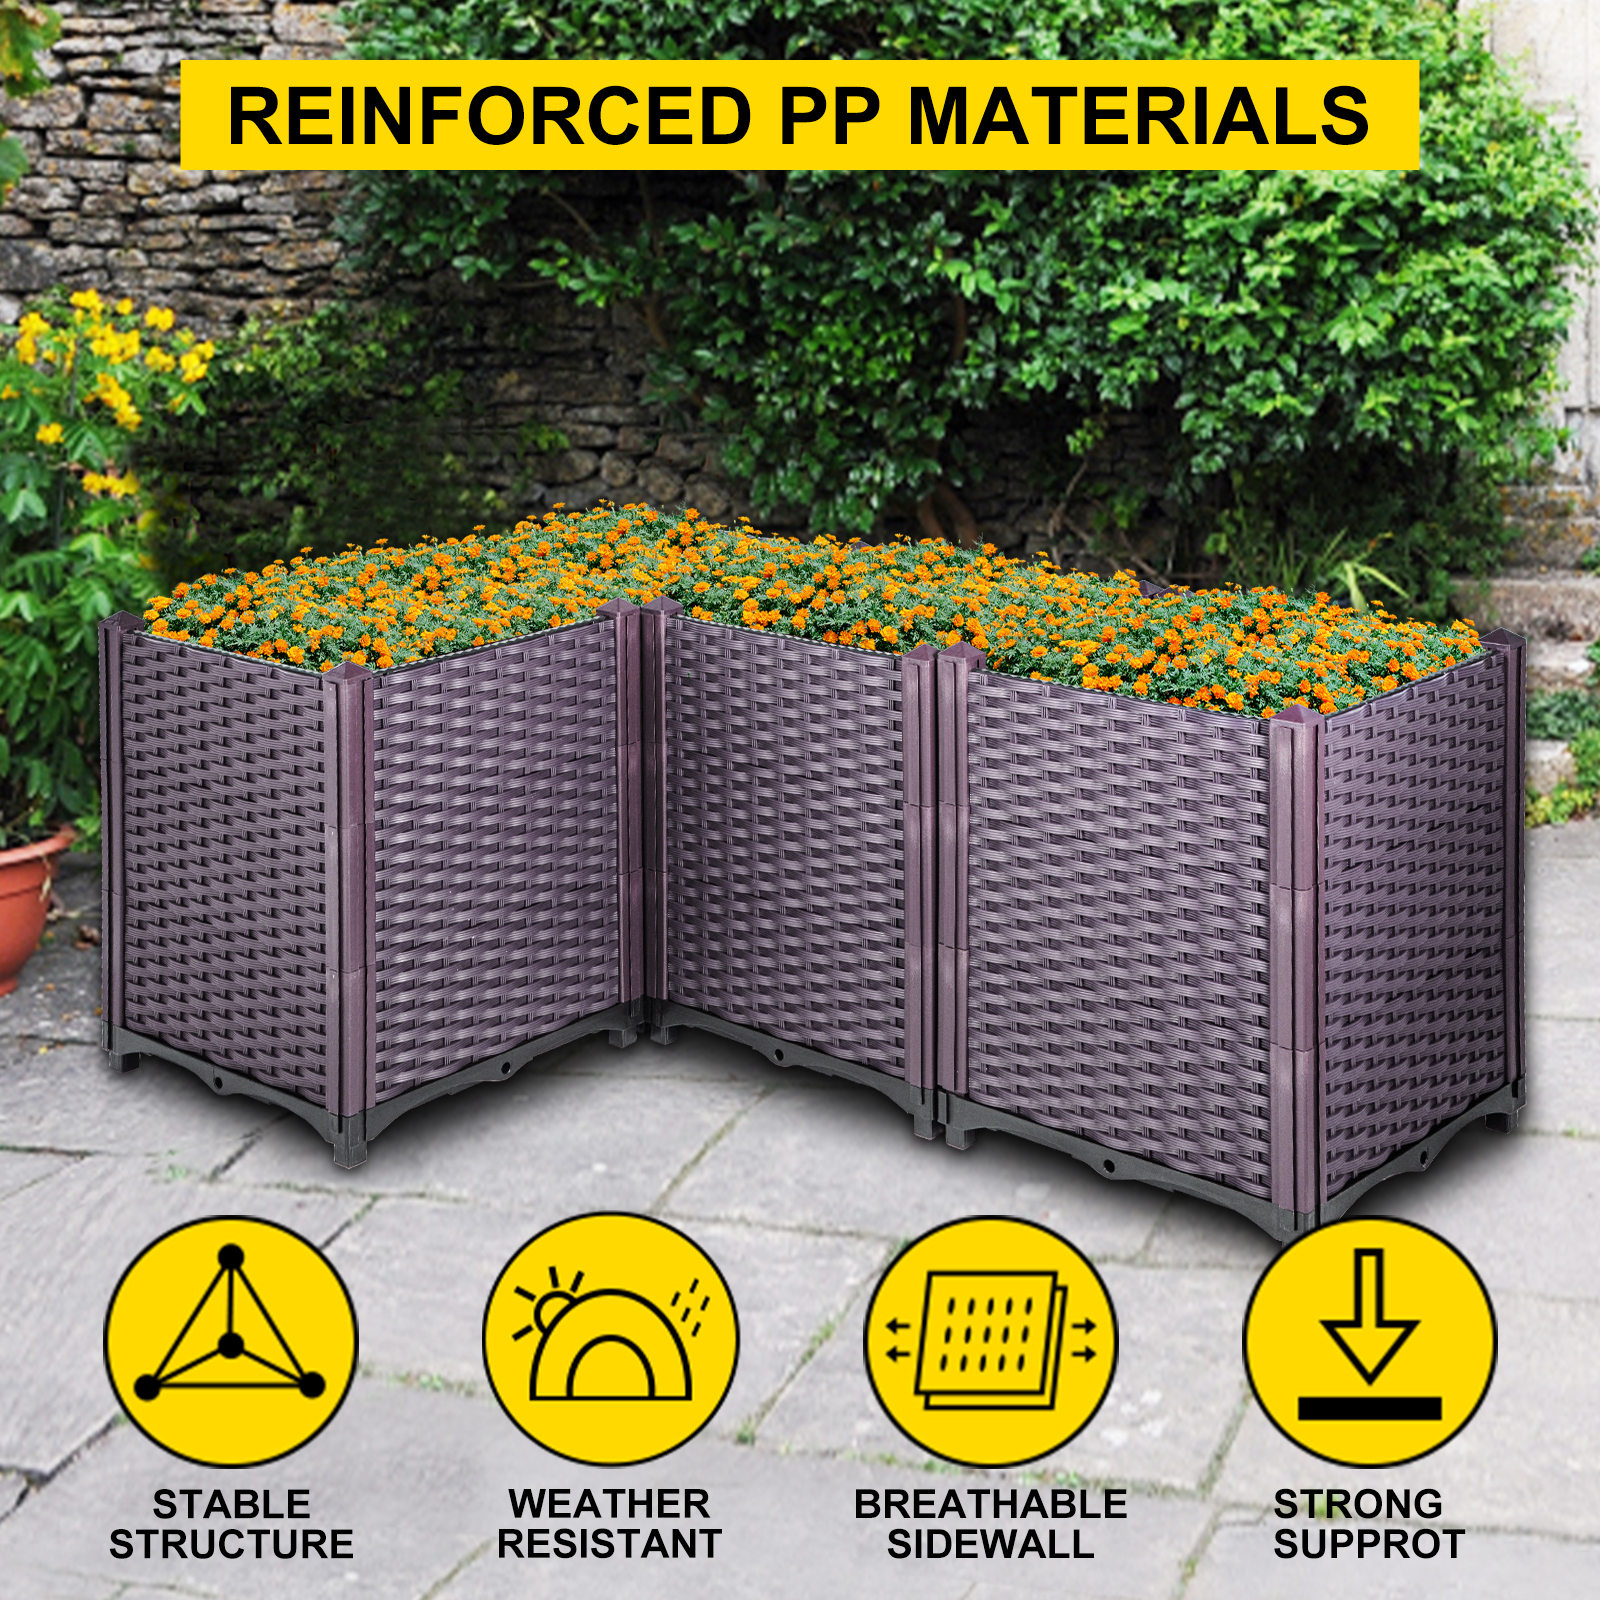 Gardener's Supply Company Reinforced Plant Grow Bag, Ultra Durable Fabric  Pots for Vegetables, Flowers & Plants with Side Holders, 5 Gallon Soil Mix